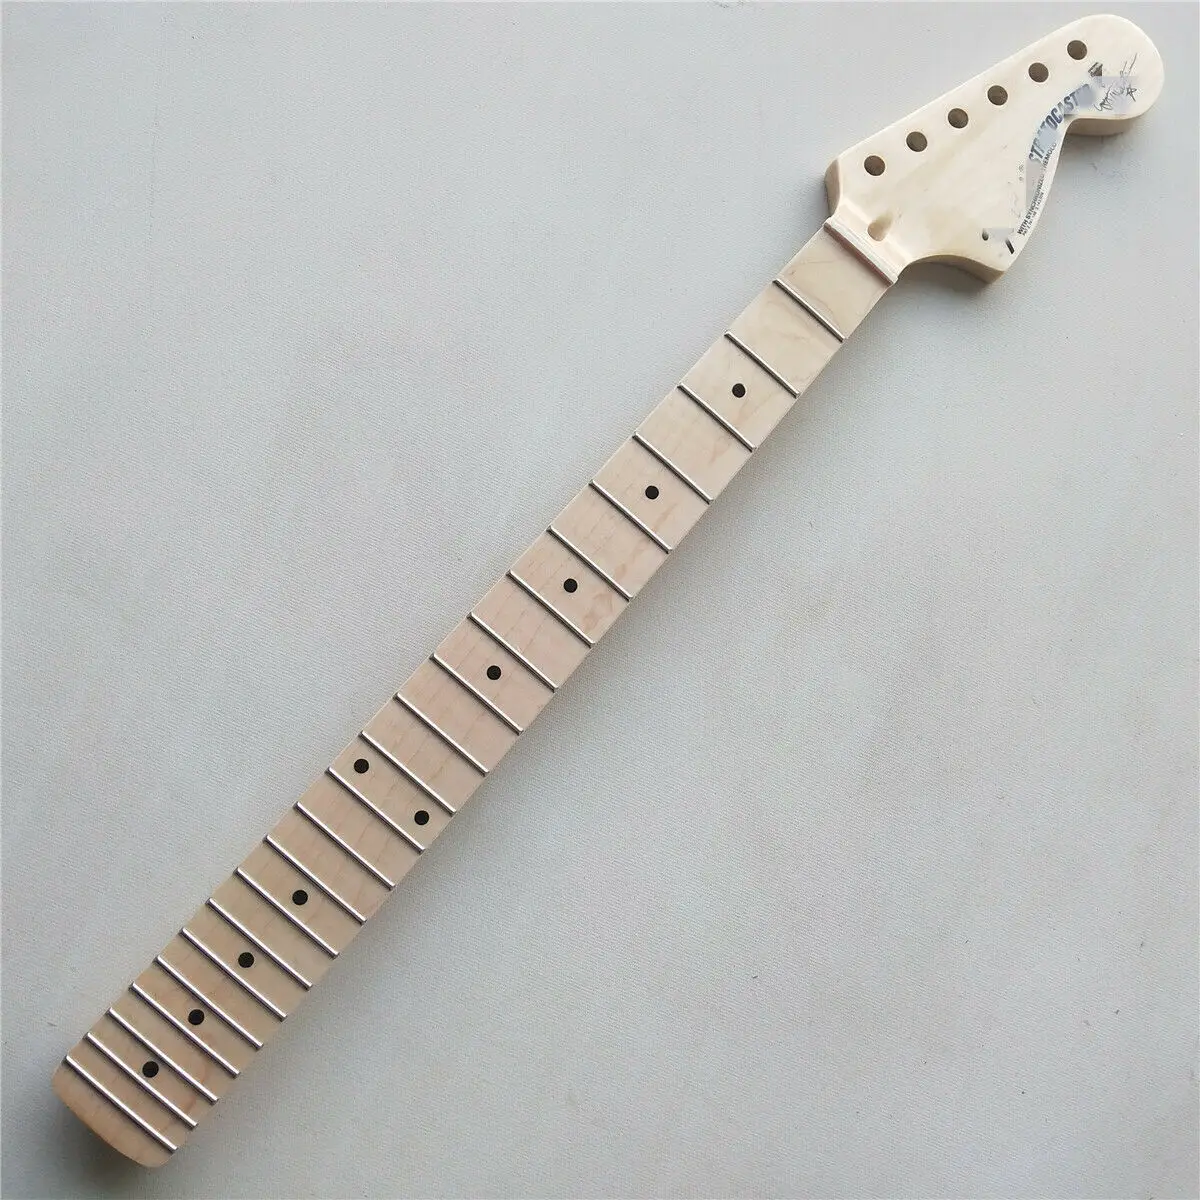 22 fret 25.5 inch Big head Guitar neck Maple Maple Fingerboard dot Inlay Gloss New Replacement enlarge